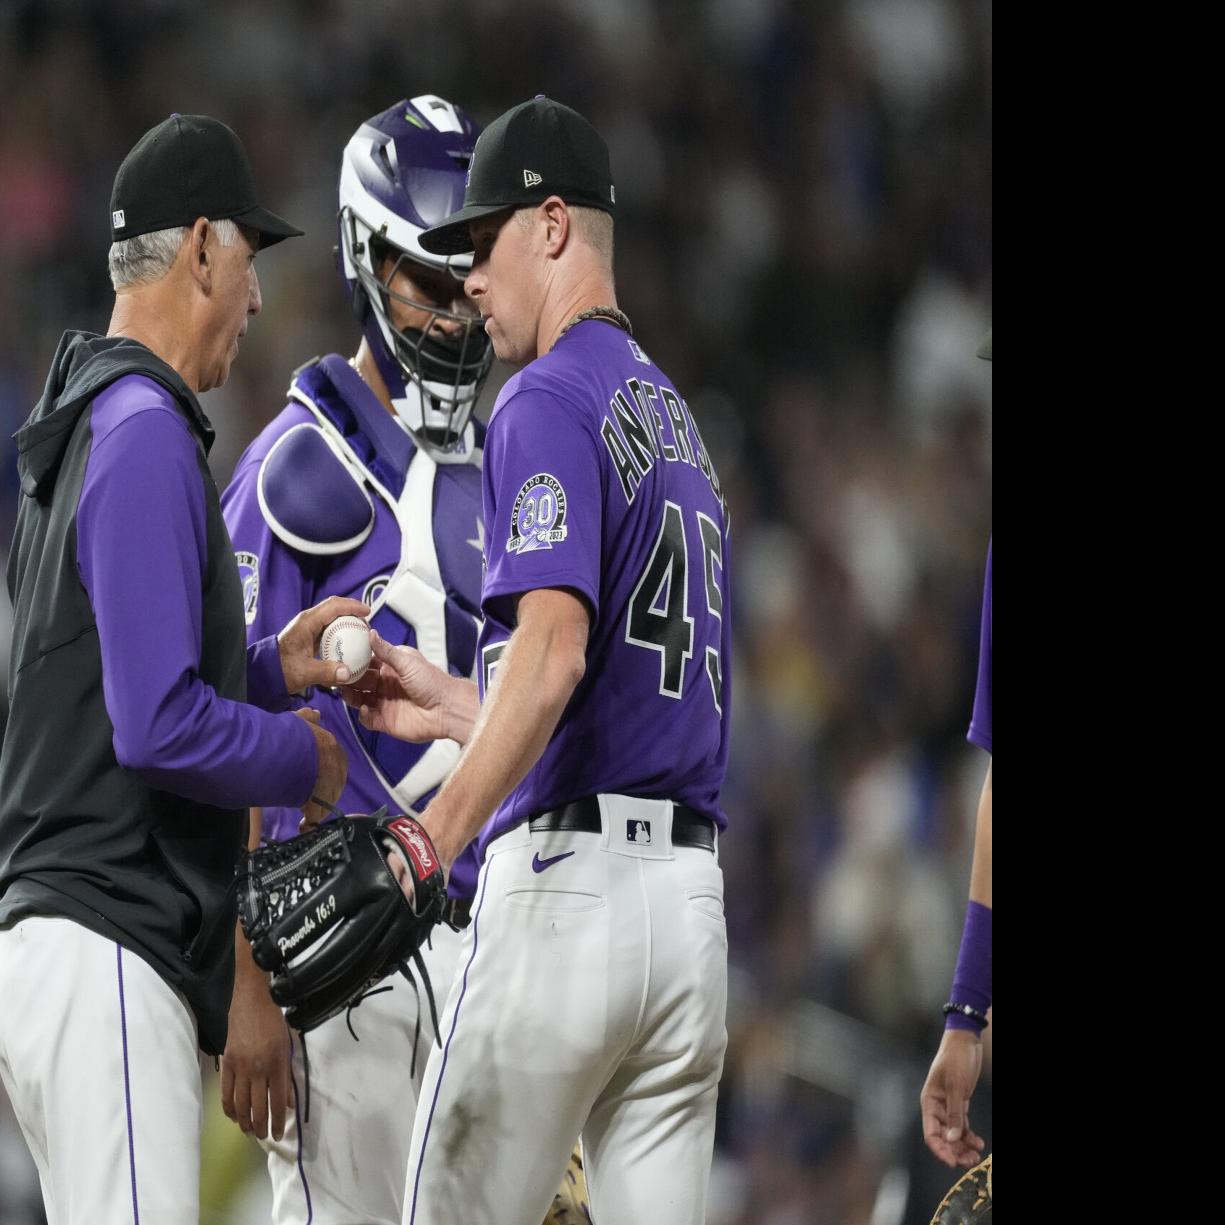 Matsui's slam lifts Rockies over Phillies 10-5, Colorado takes 2-0